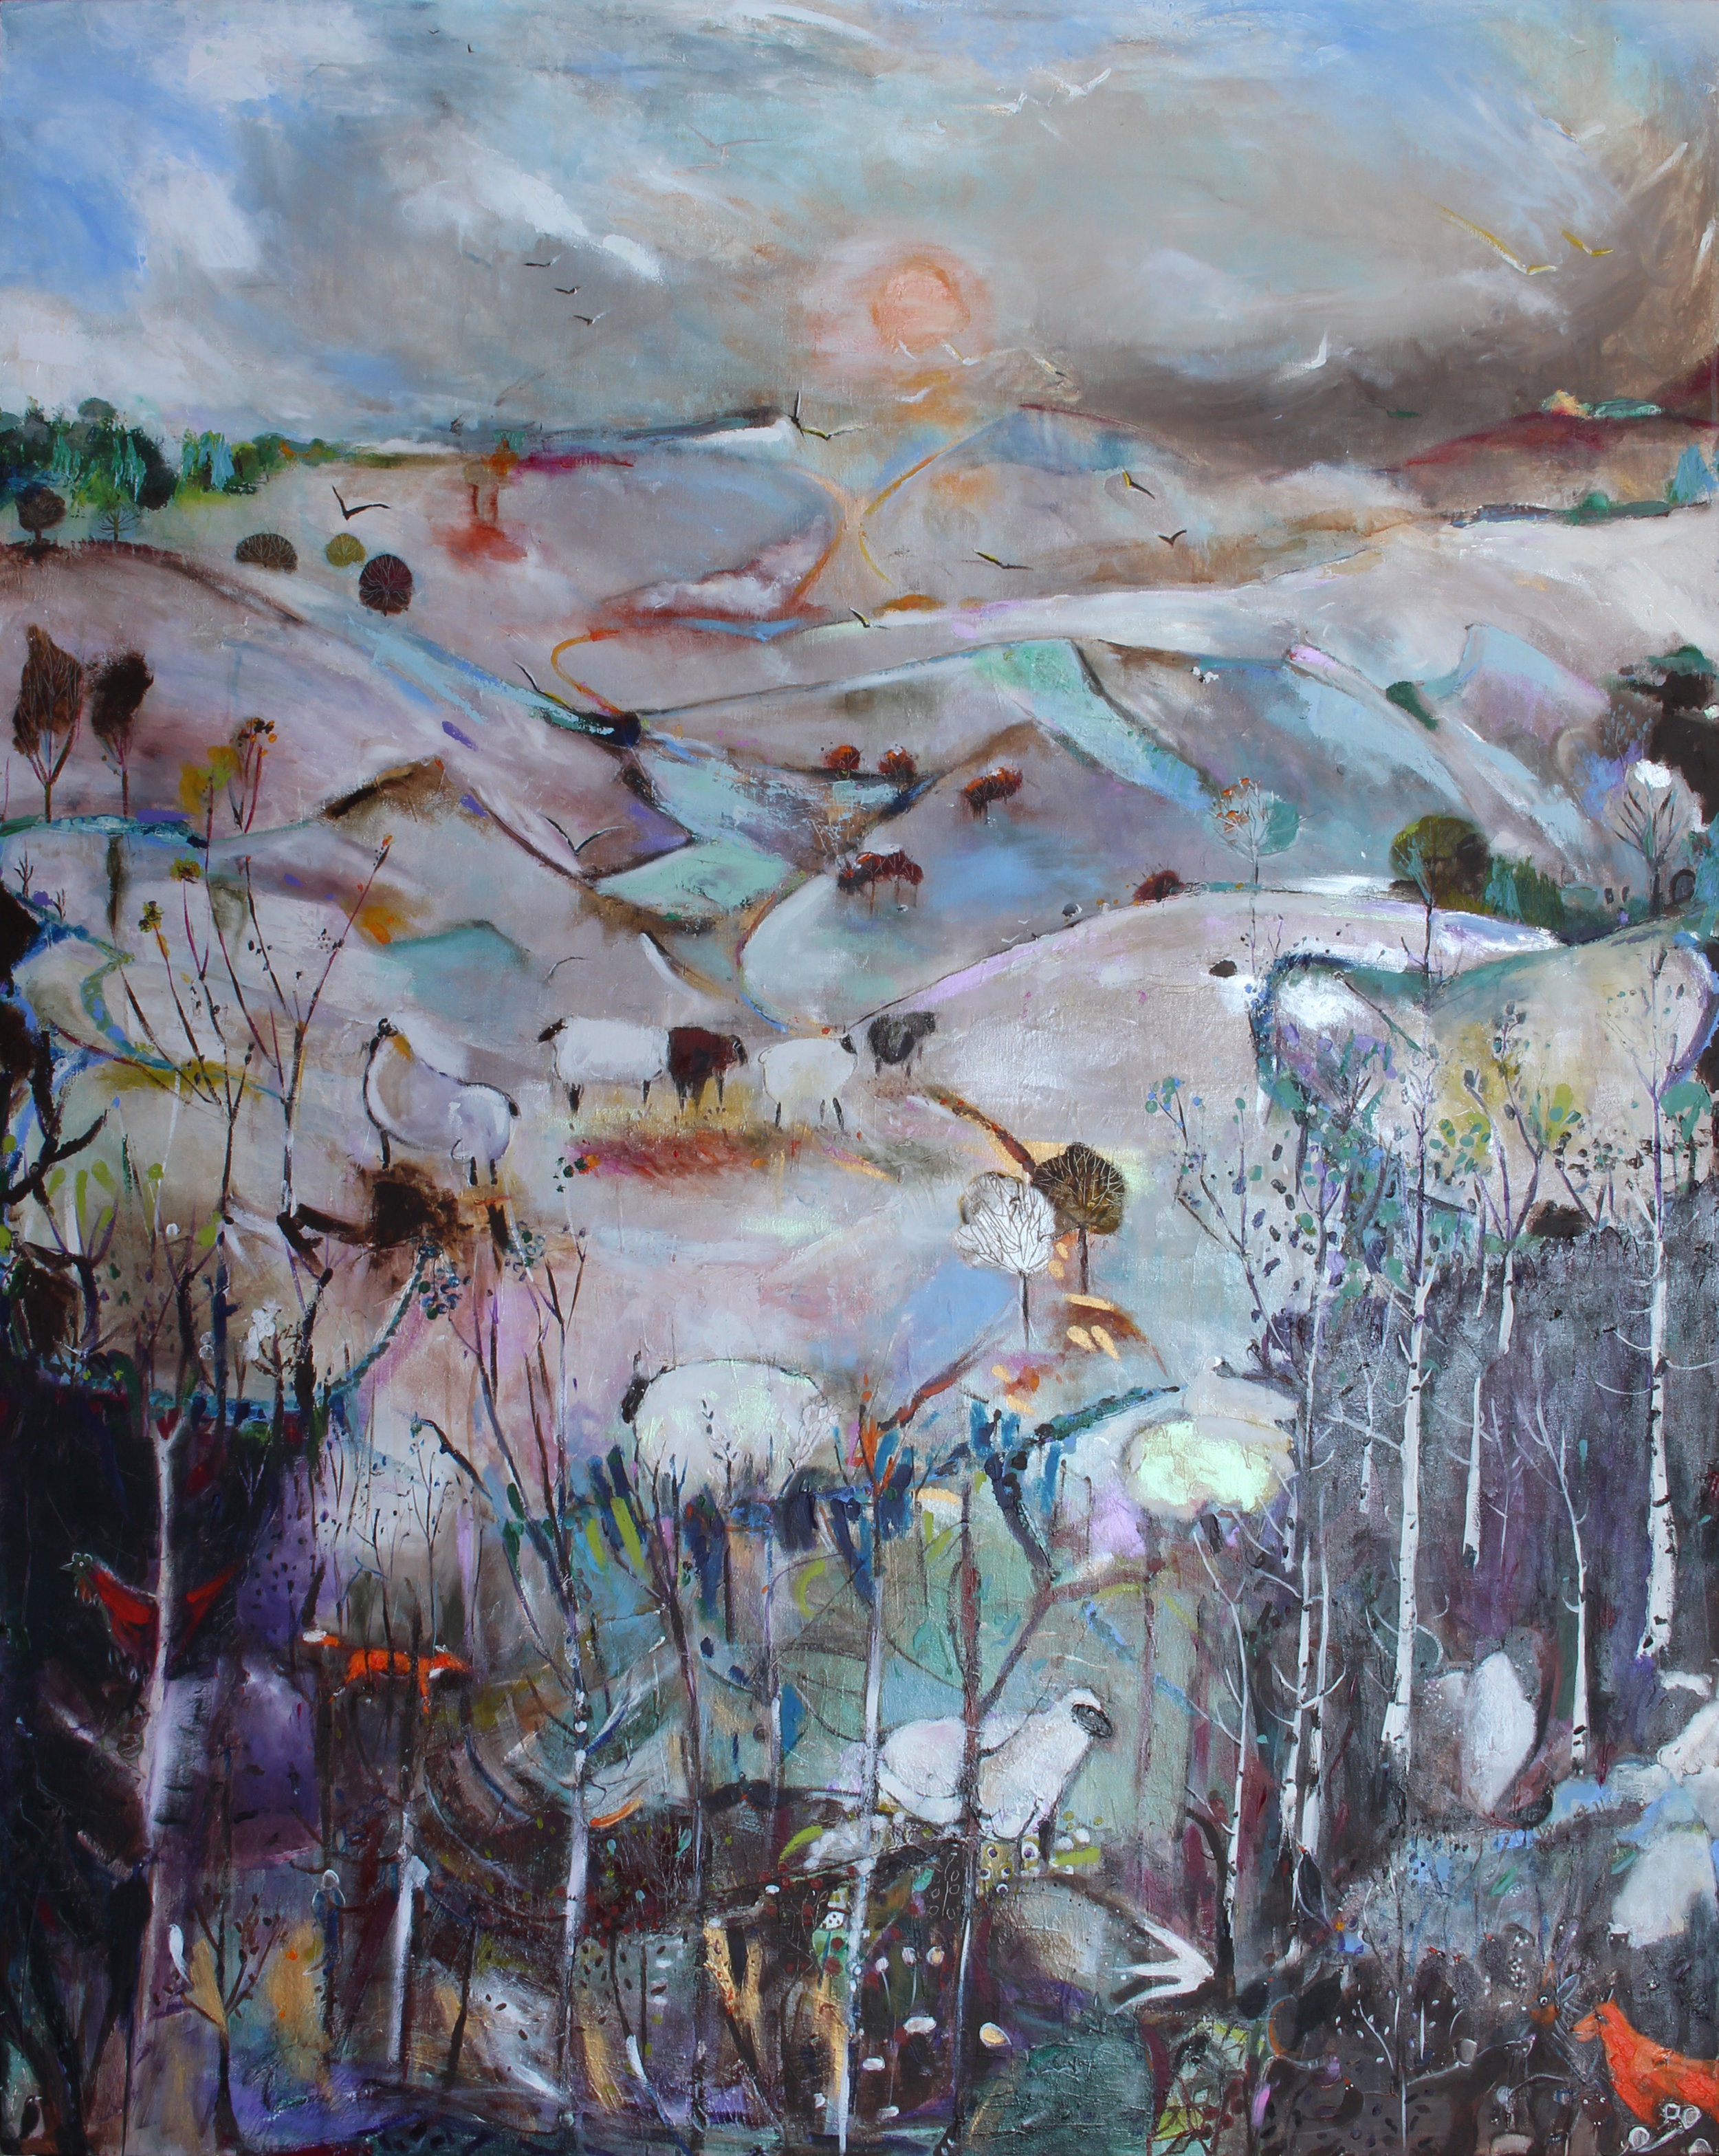 Within a Winter Landscape, acrylic on canvas, 158 x 127 cm, £3,000